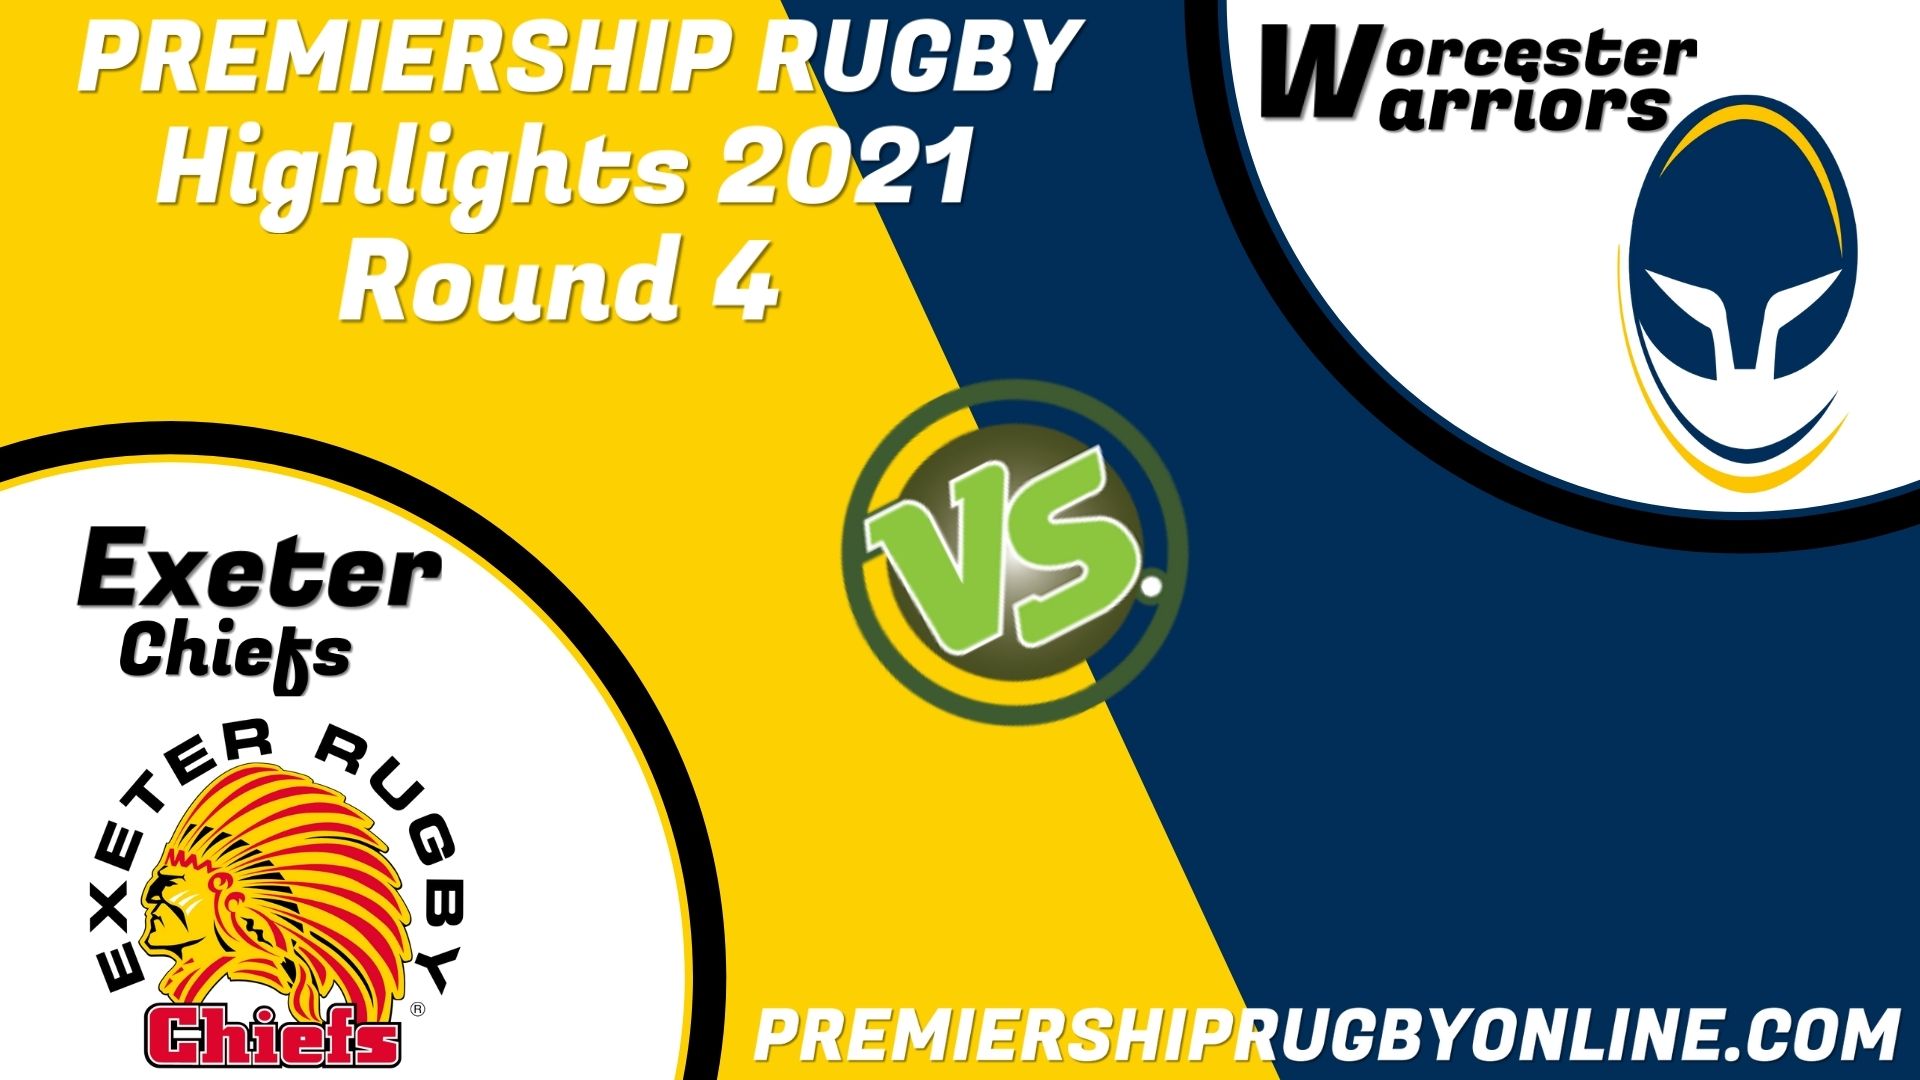 Exeter Chiefs Vs Worcester Warriors Highlights 2021 RD 4